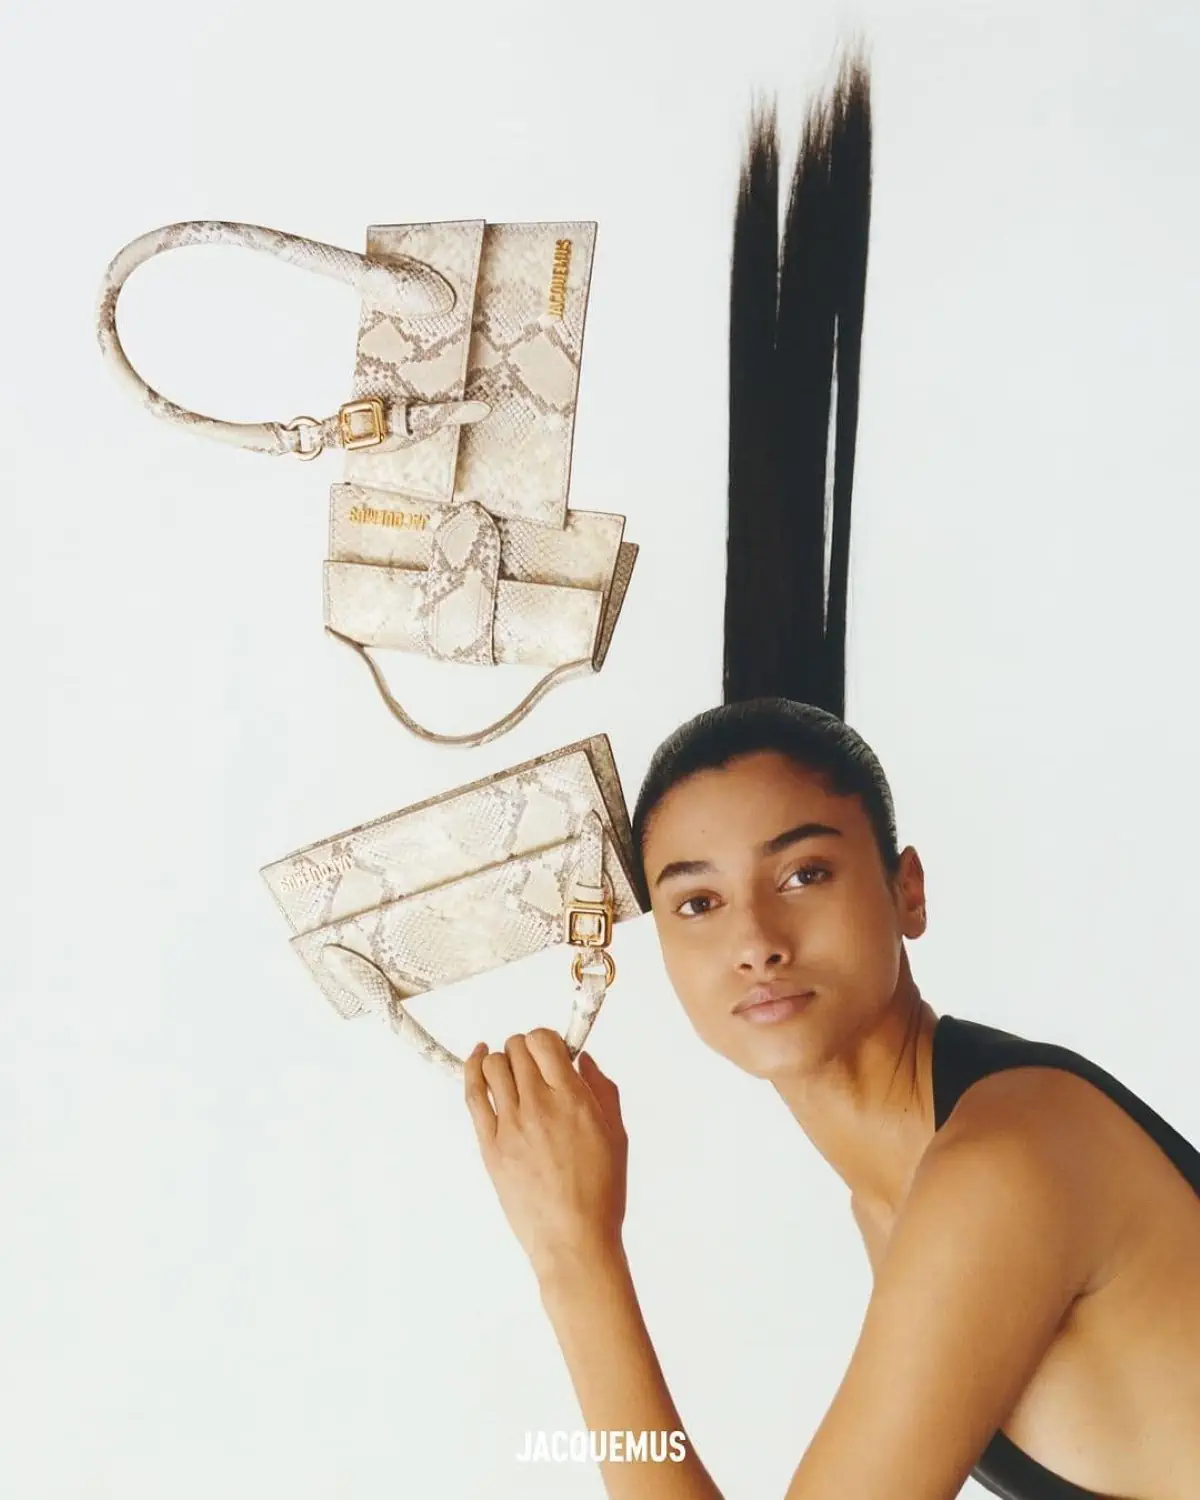 Imaan Hammam stars as the face of Jacquemus' ''Les Sculptures'' Spring-Summer 2024 campaign